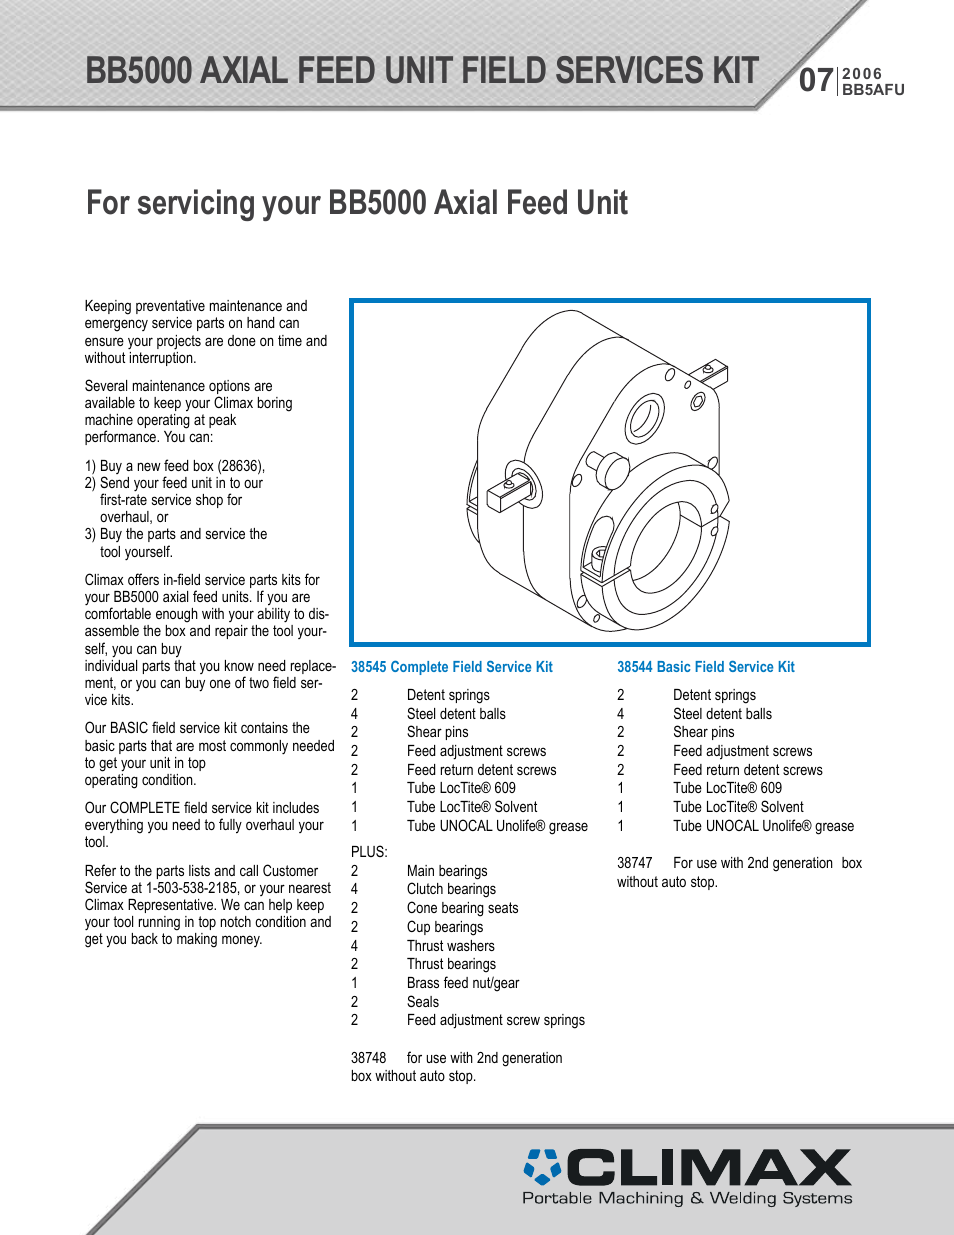 BB5000 Axial Unit Field Services Kit